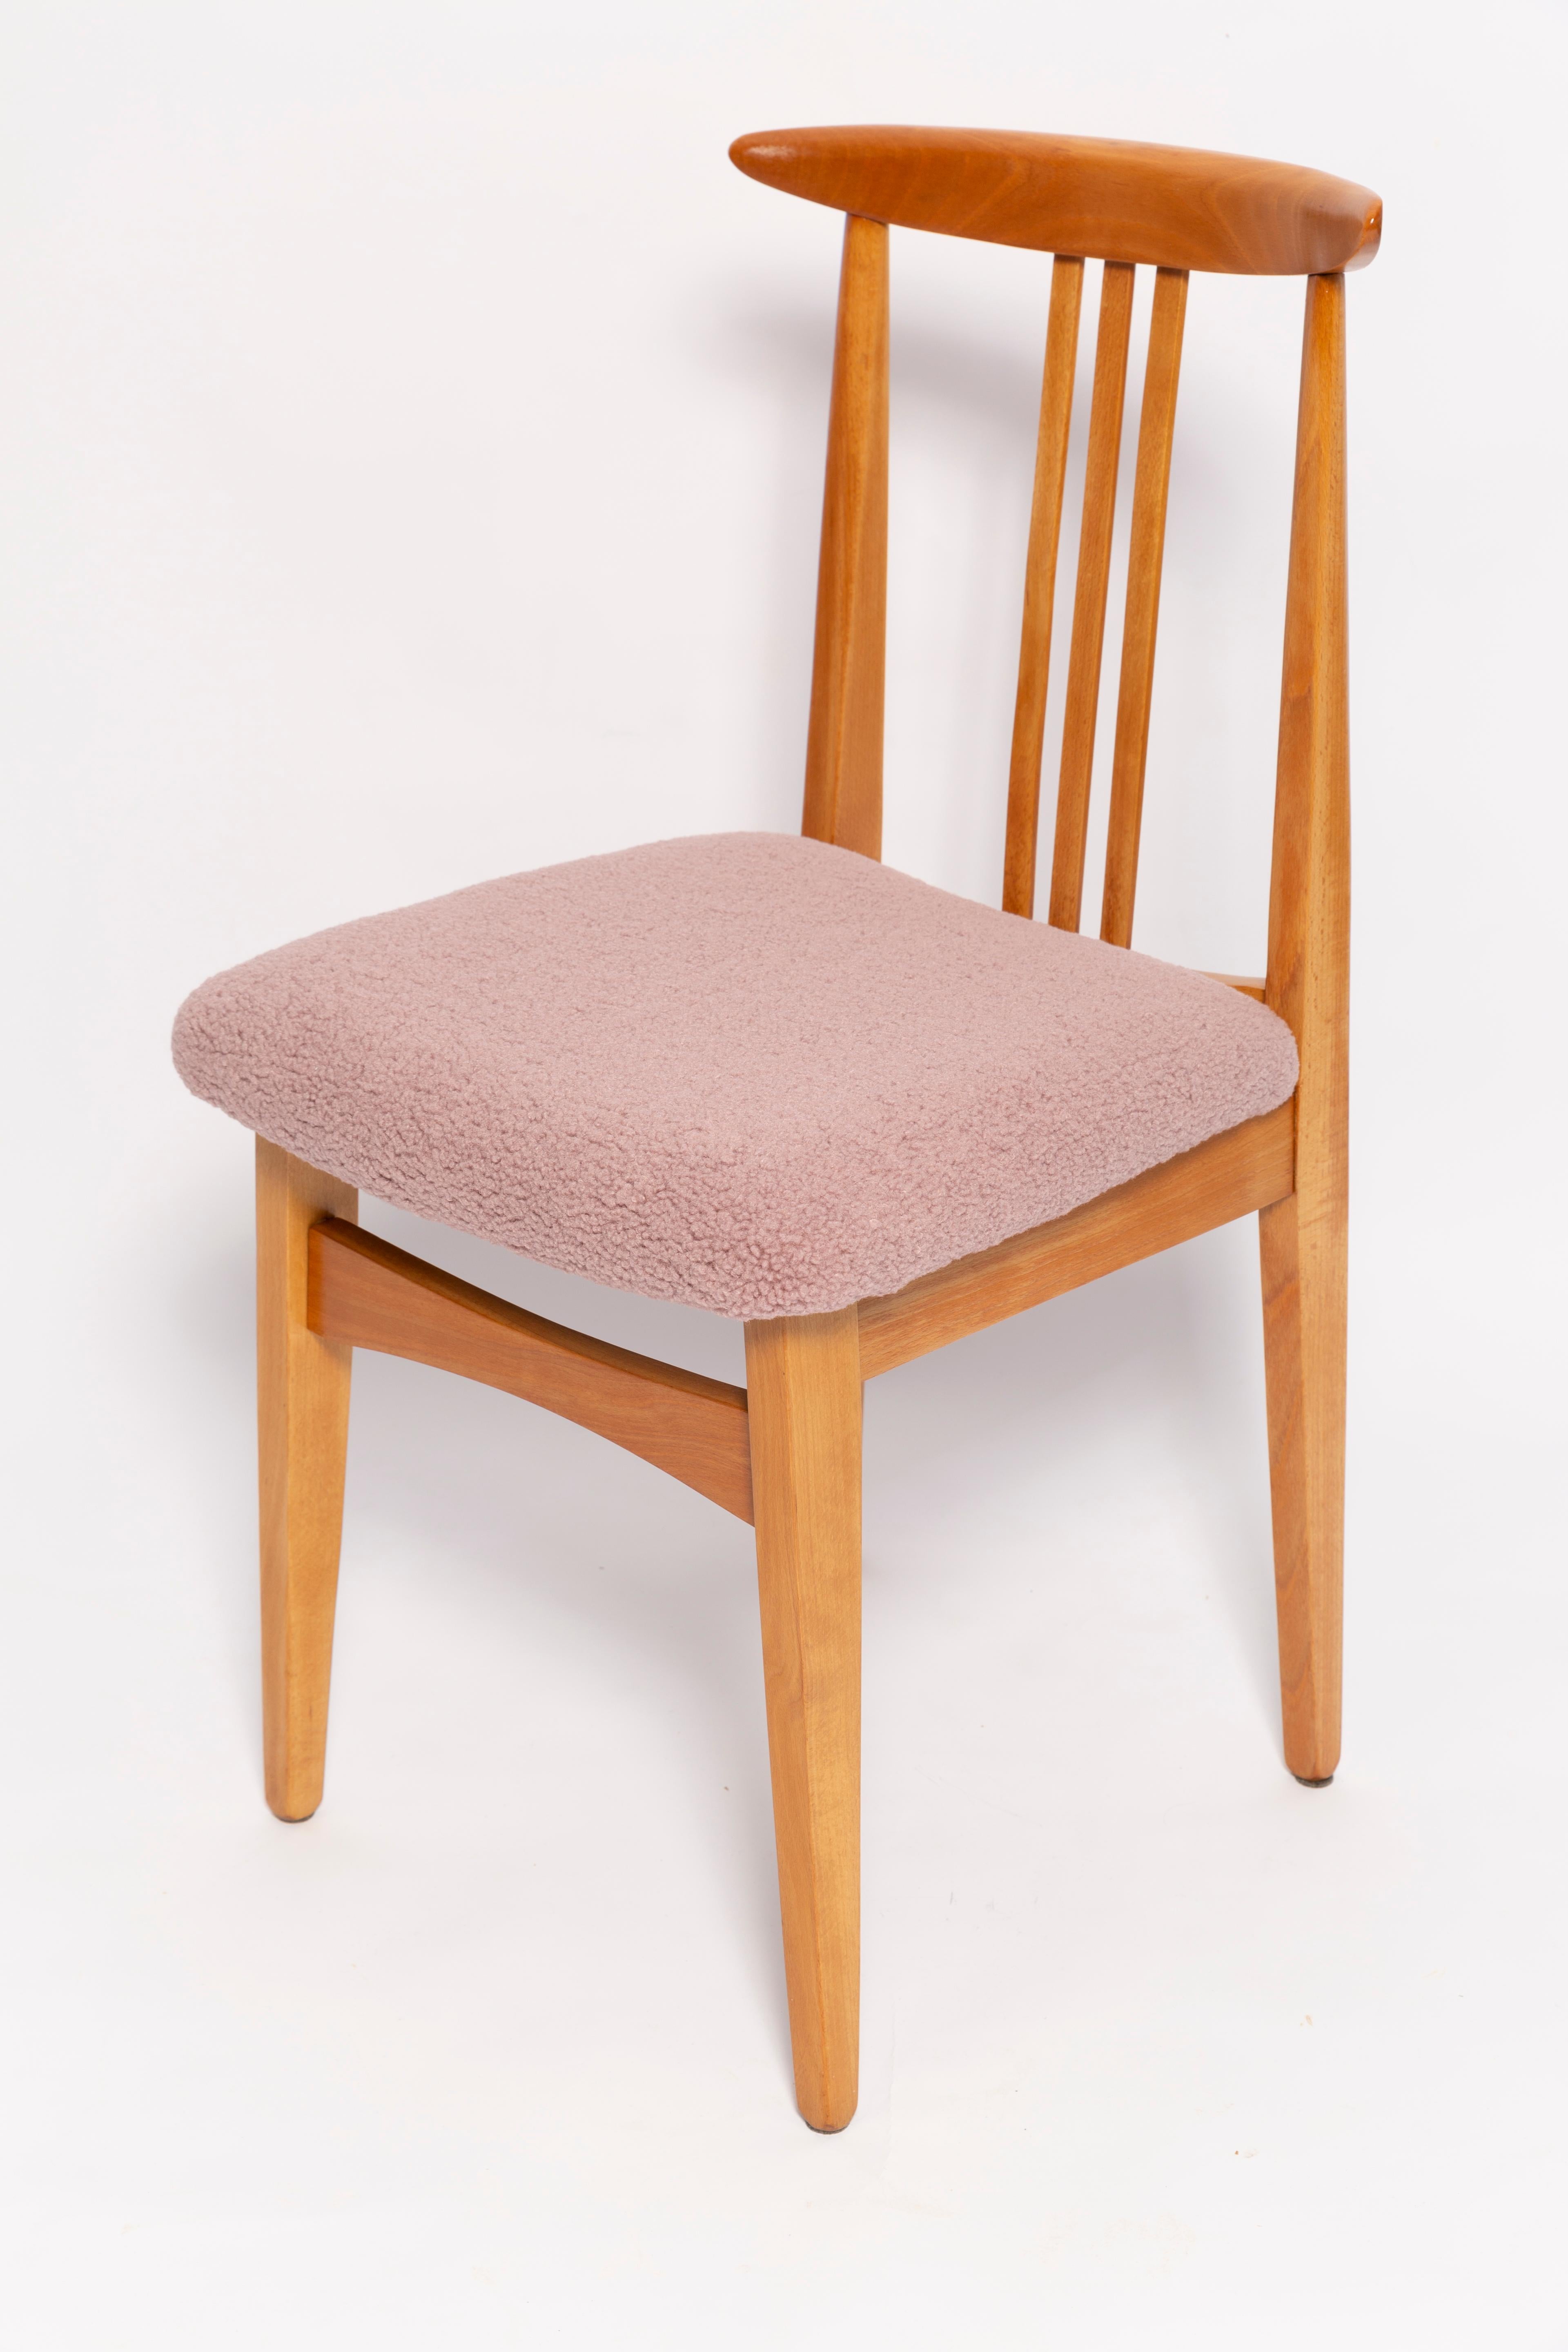 Ten Mid-Century Pink Blush Boucle Chairs, Light Wood, M. Zielinski, Europe 1960s For Sale 1